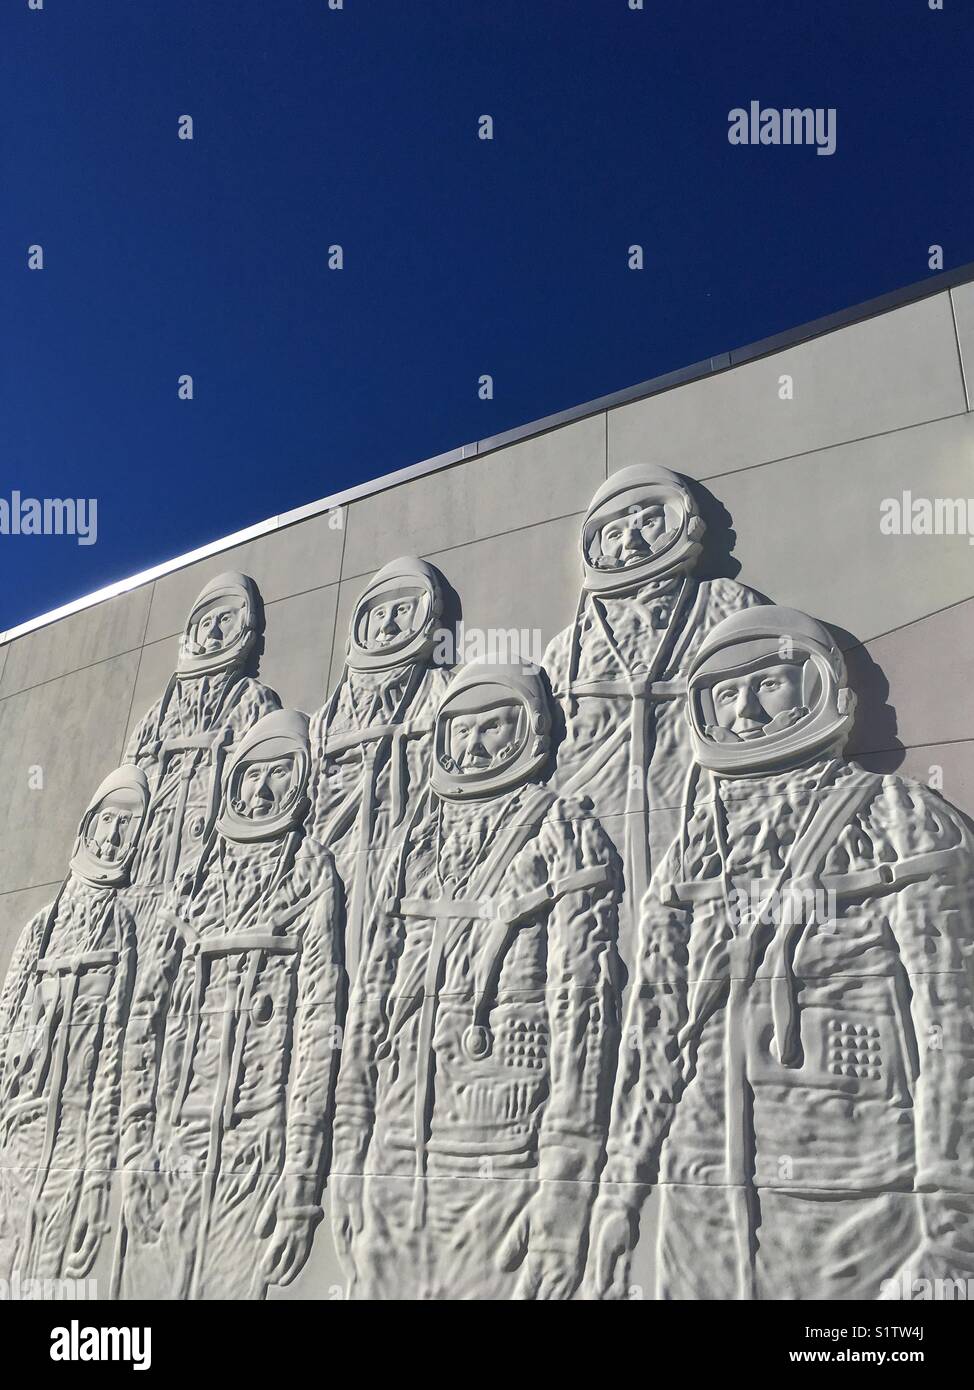 Mercury Seven astronauts sculpture at Kennedy Space Center Stock Photo